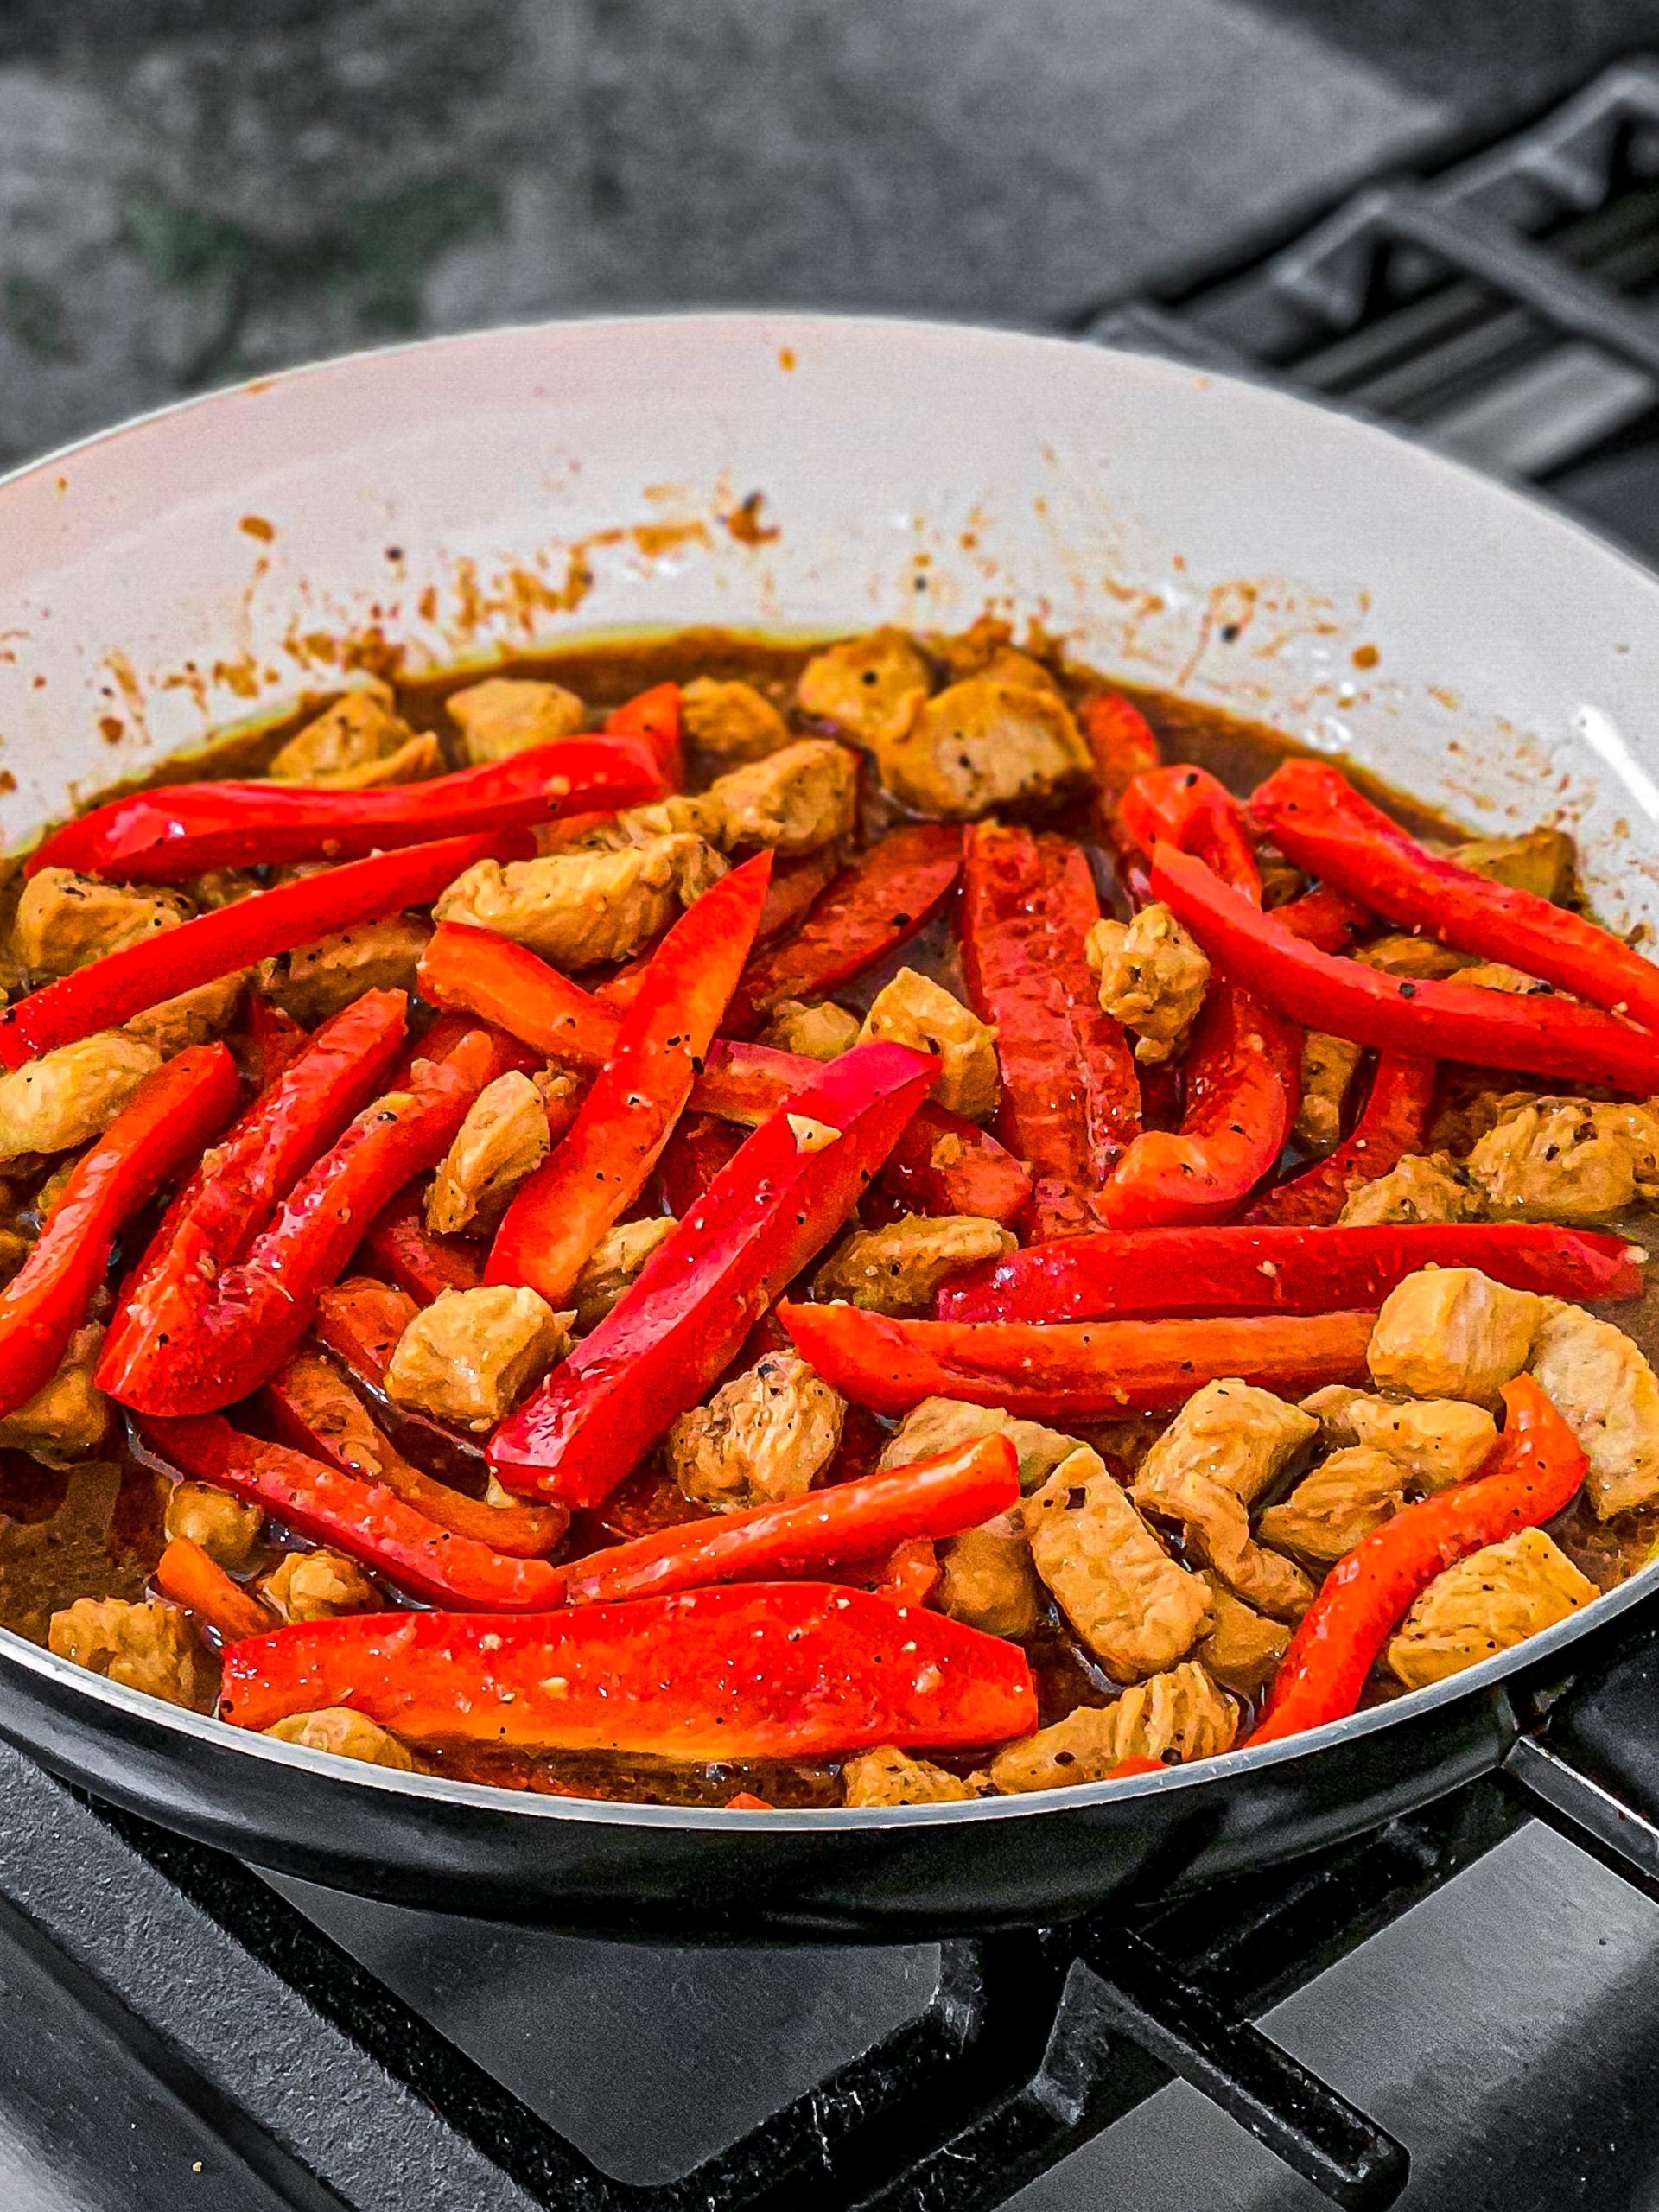 Stir and cook for 10 minutes until peppers have softened.